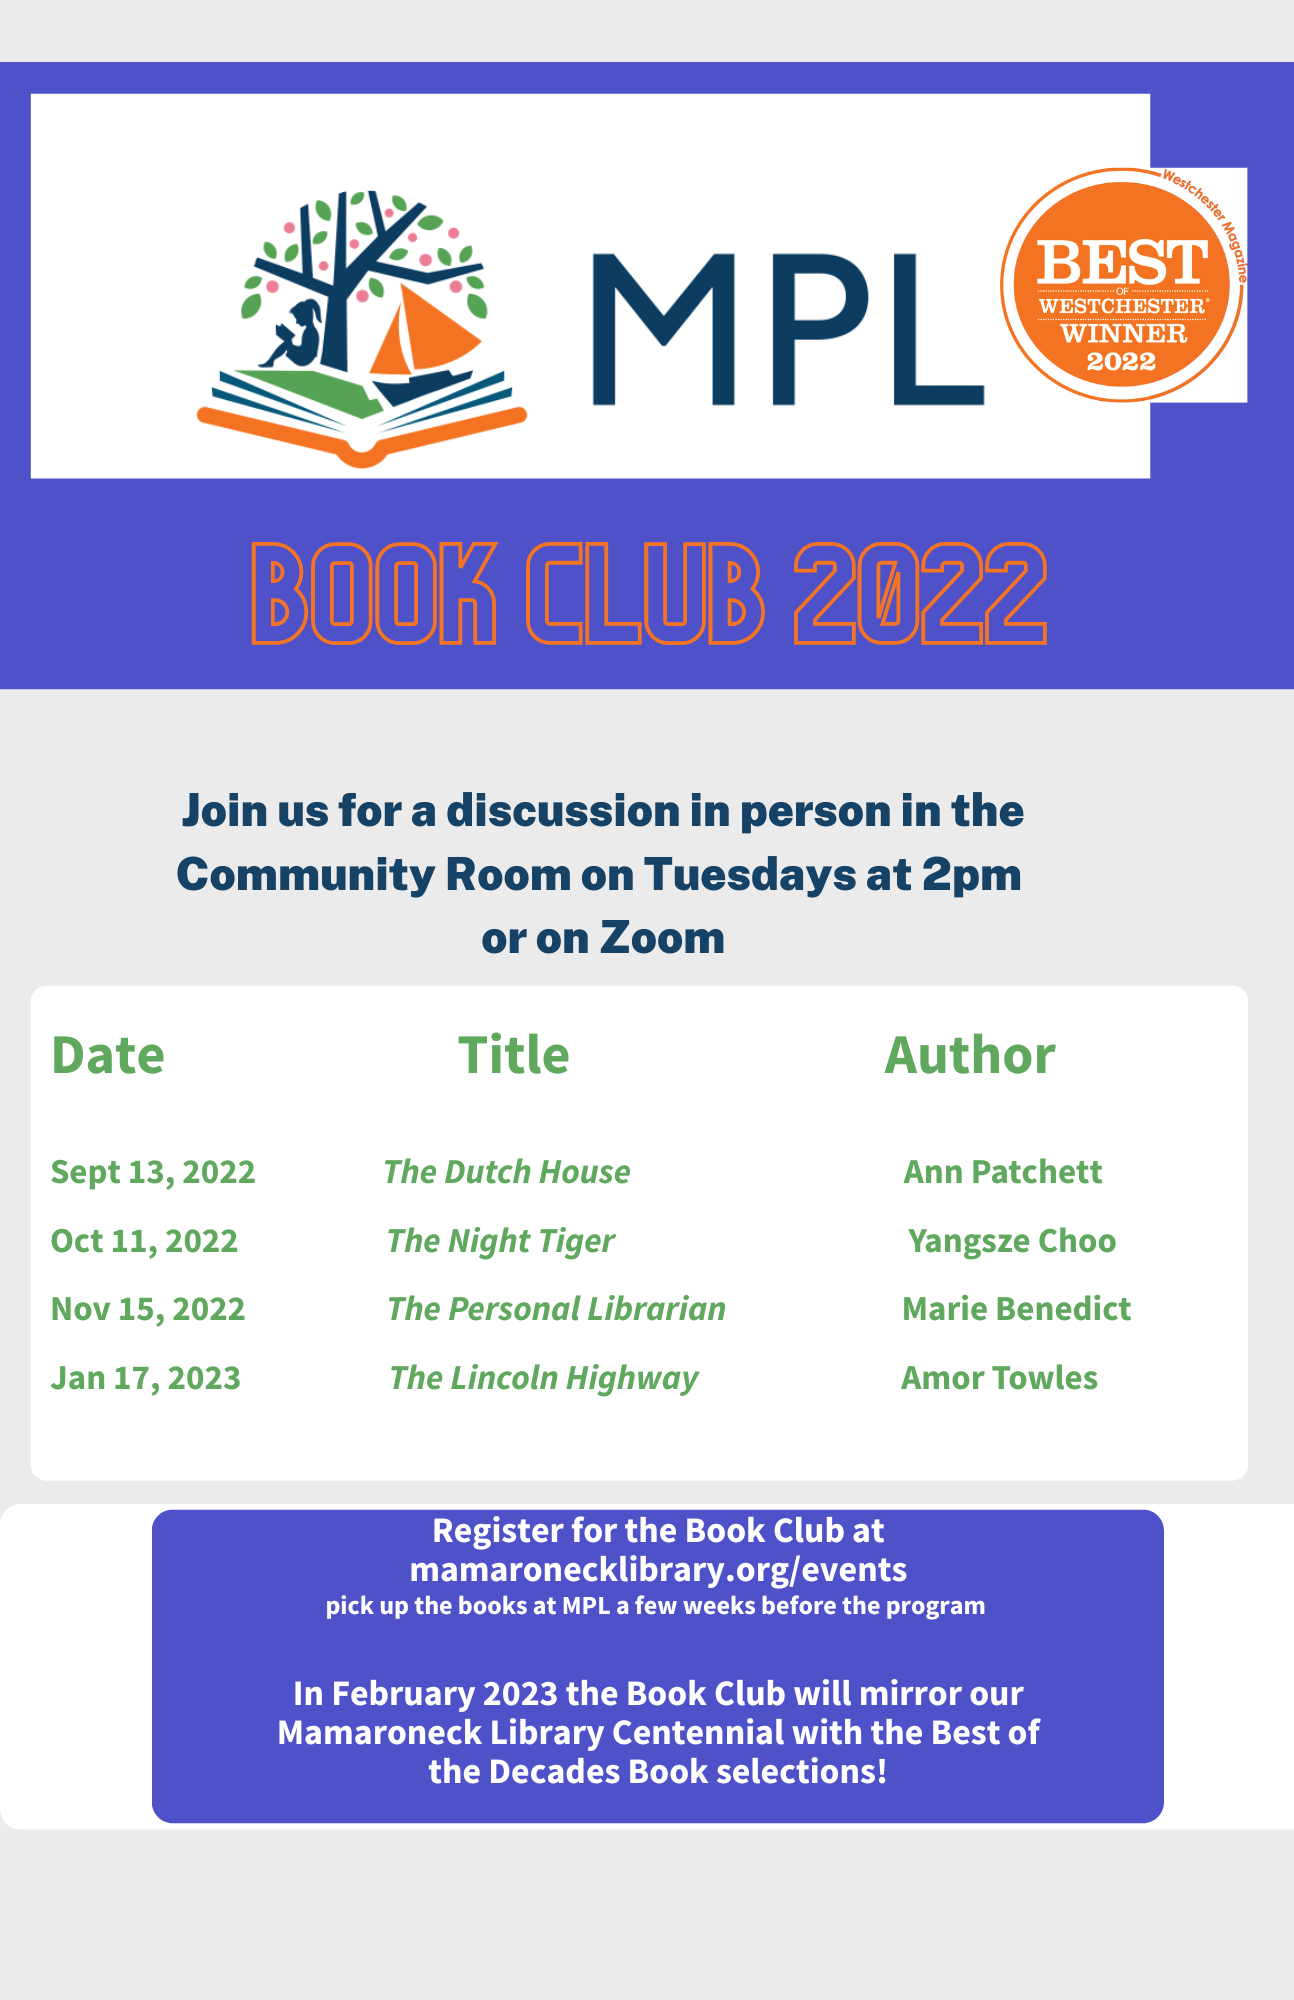 MPL Book club schedule for Fall/Winter 2022